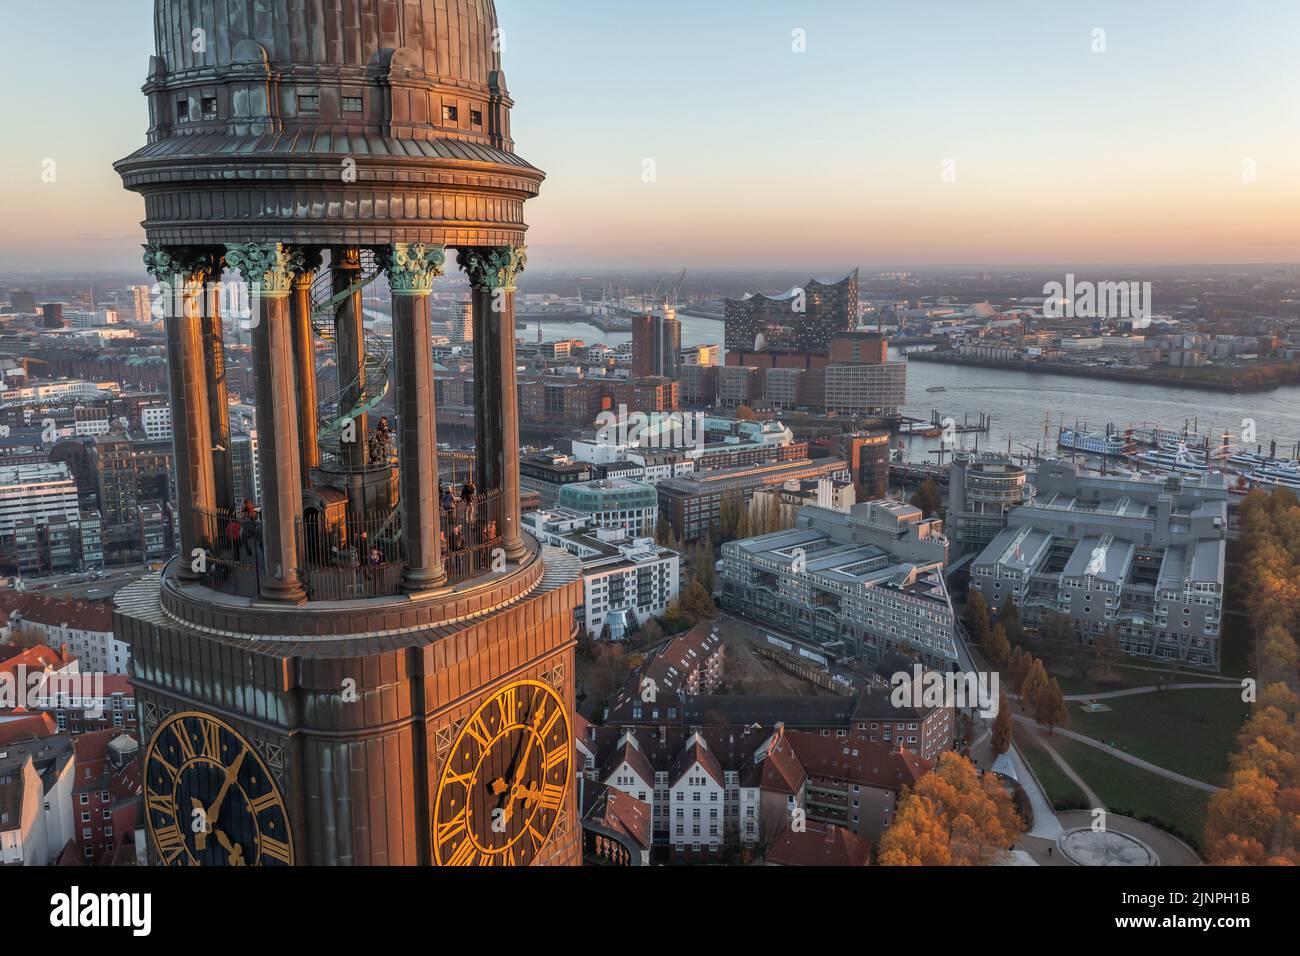 Viewing platform on the steeple of St. Michaels Church in Hamburg Stock Photo